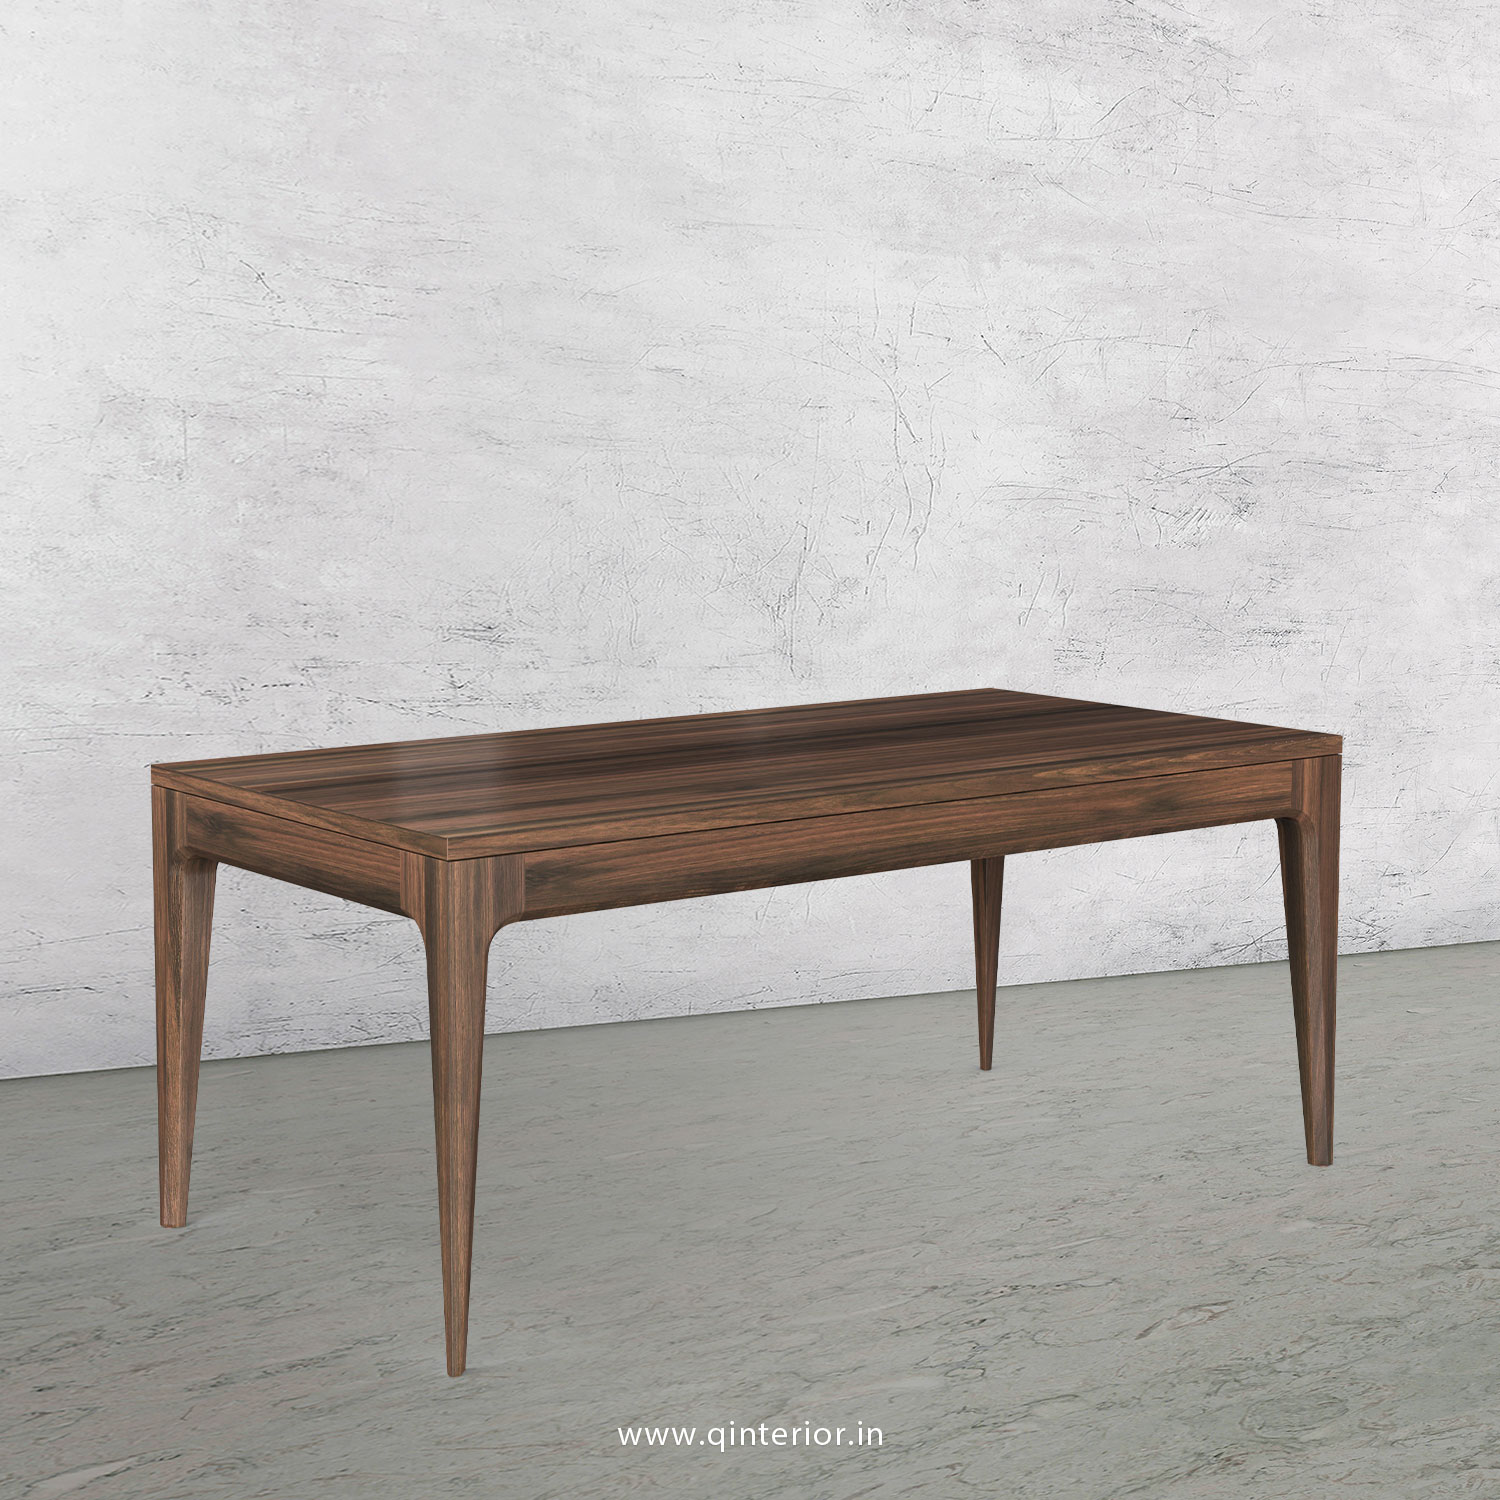 Vienna Dining Table in Walnut Finish - DTB001 C1